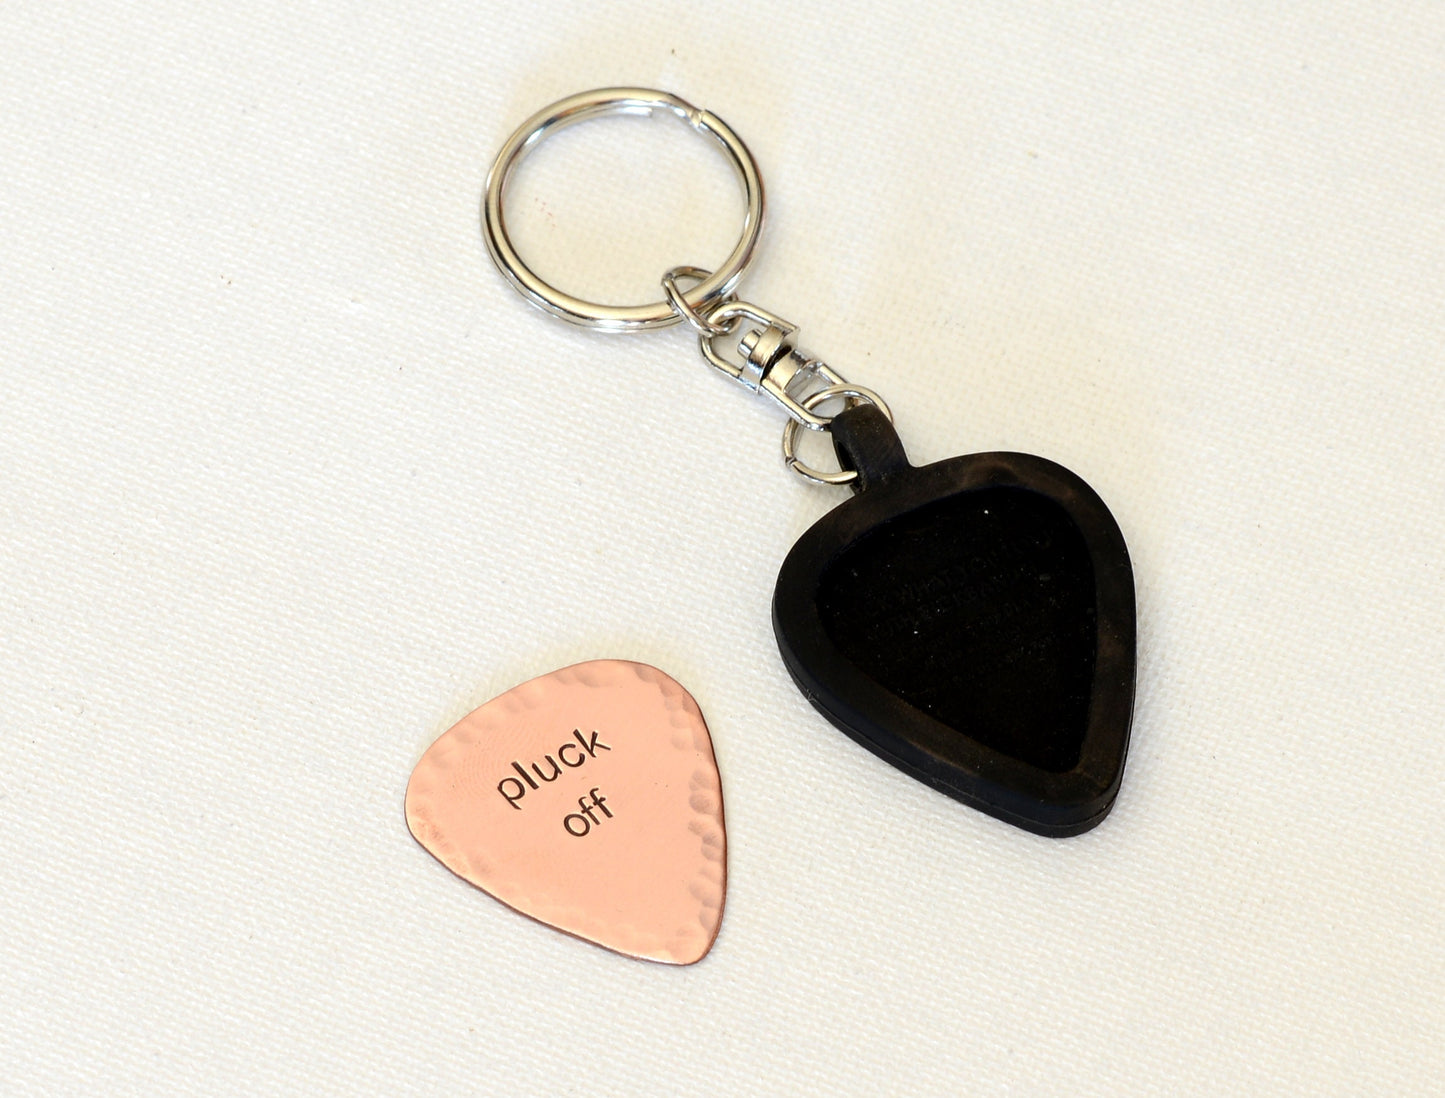 Copper guitar pick keychain with holder